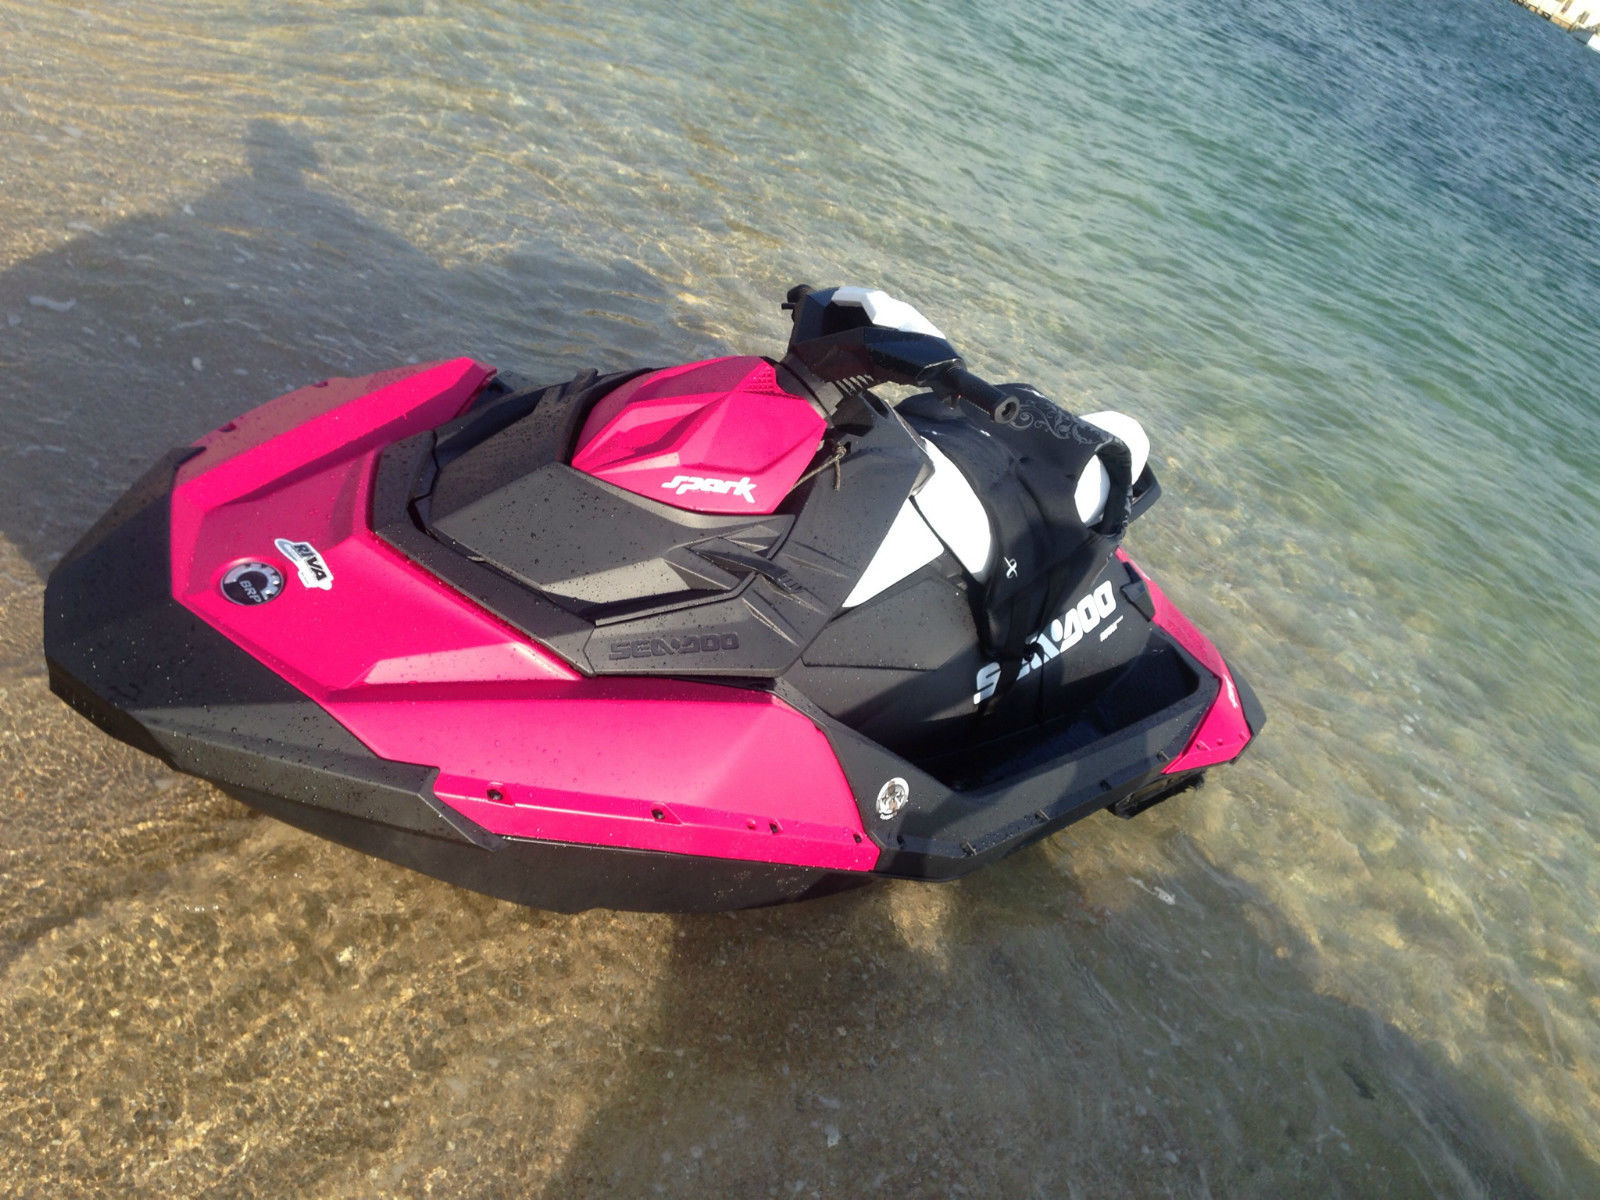 Sea Doo Spark 2014 for sale for $13,000 - Boats-from-USA.com